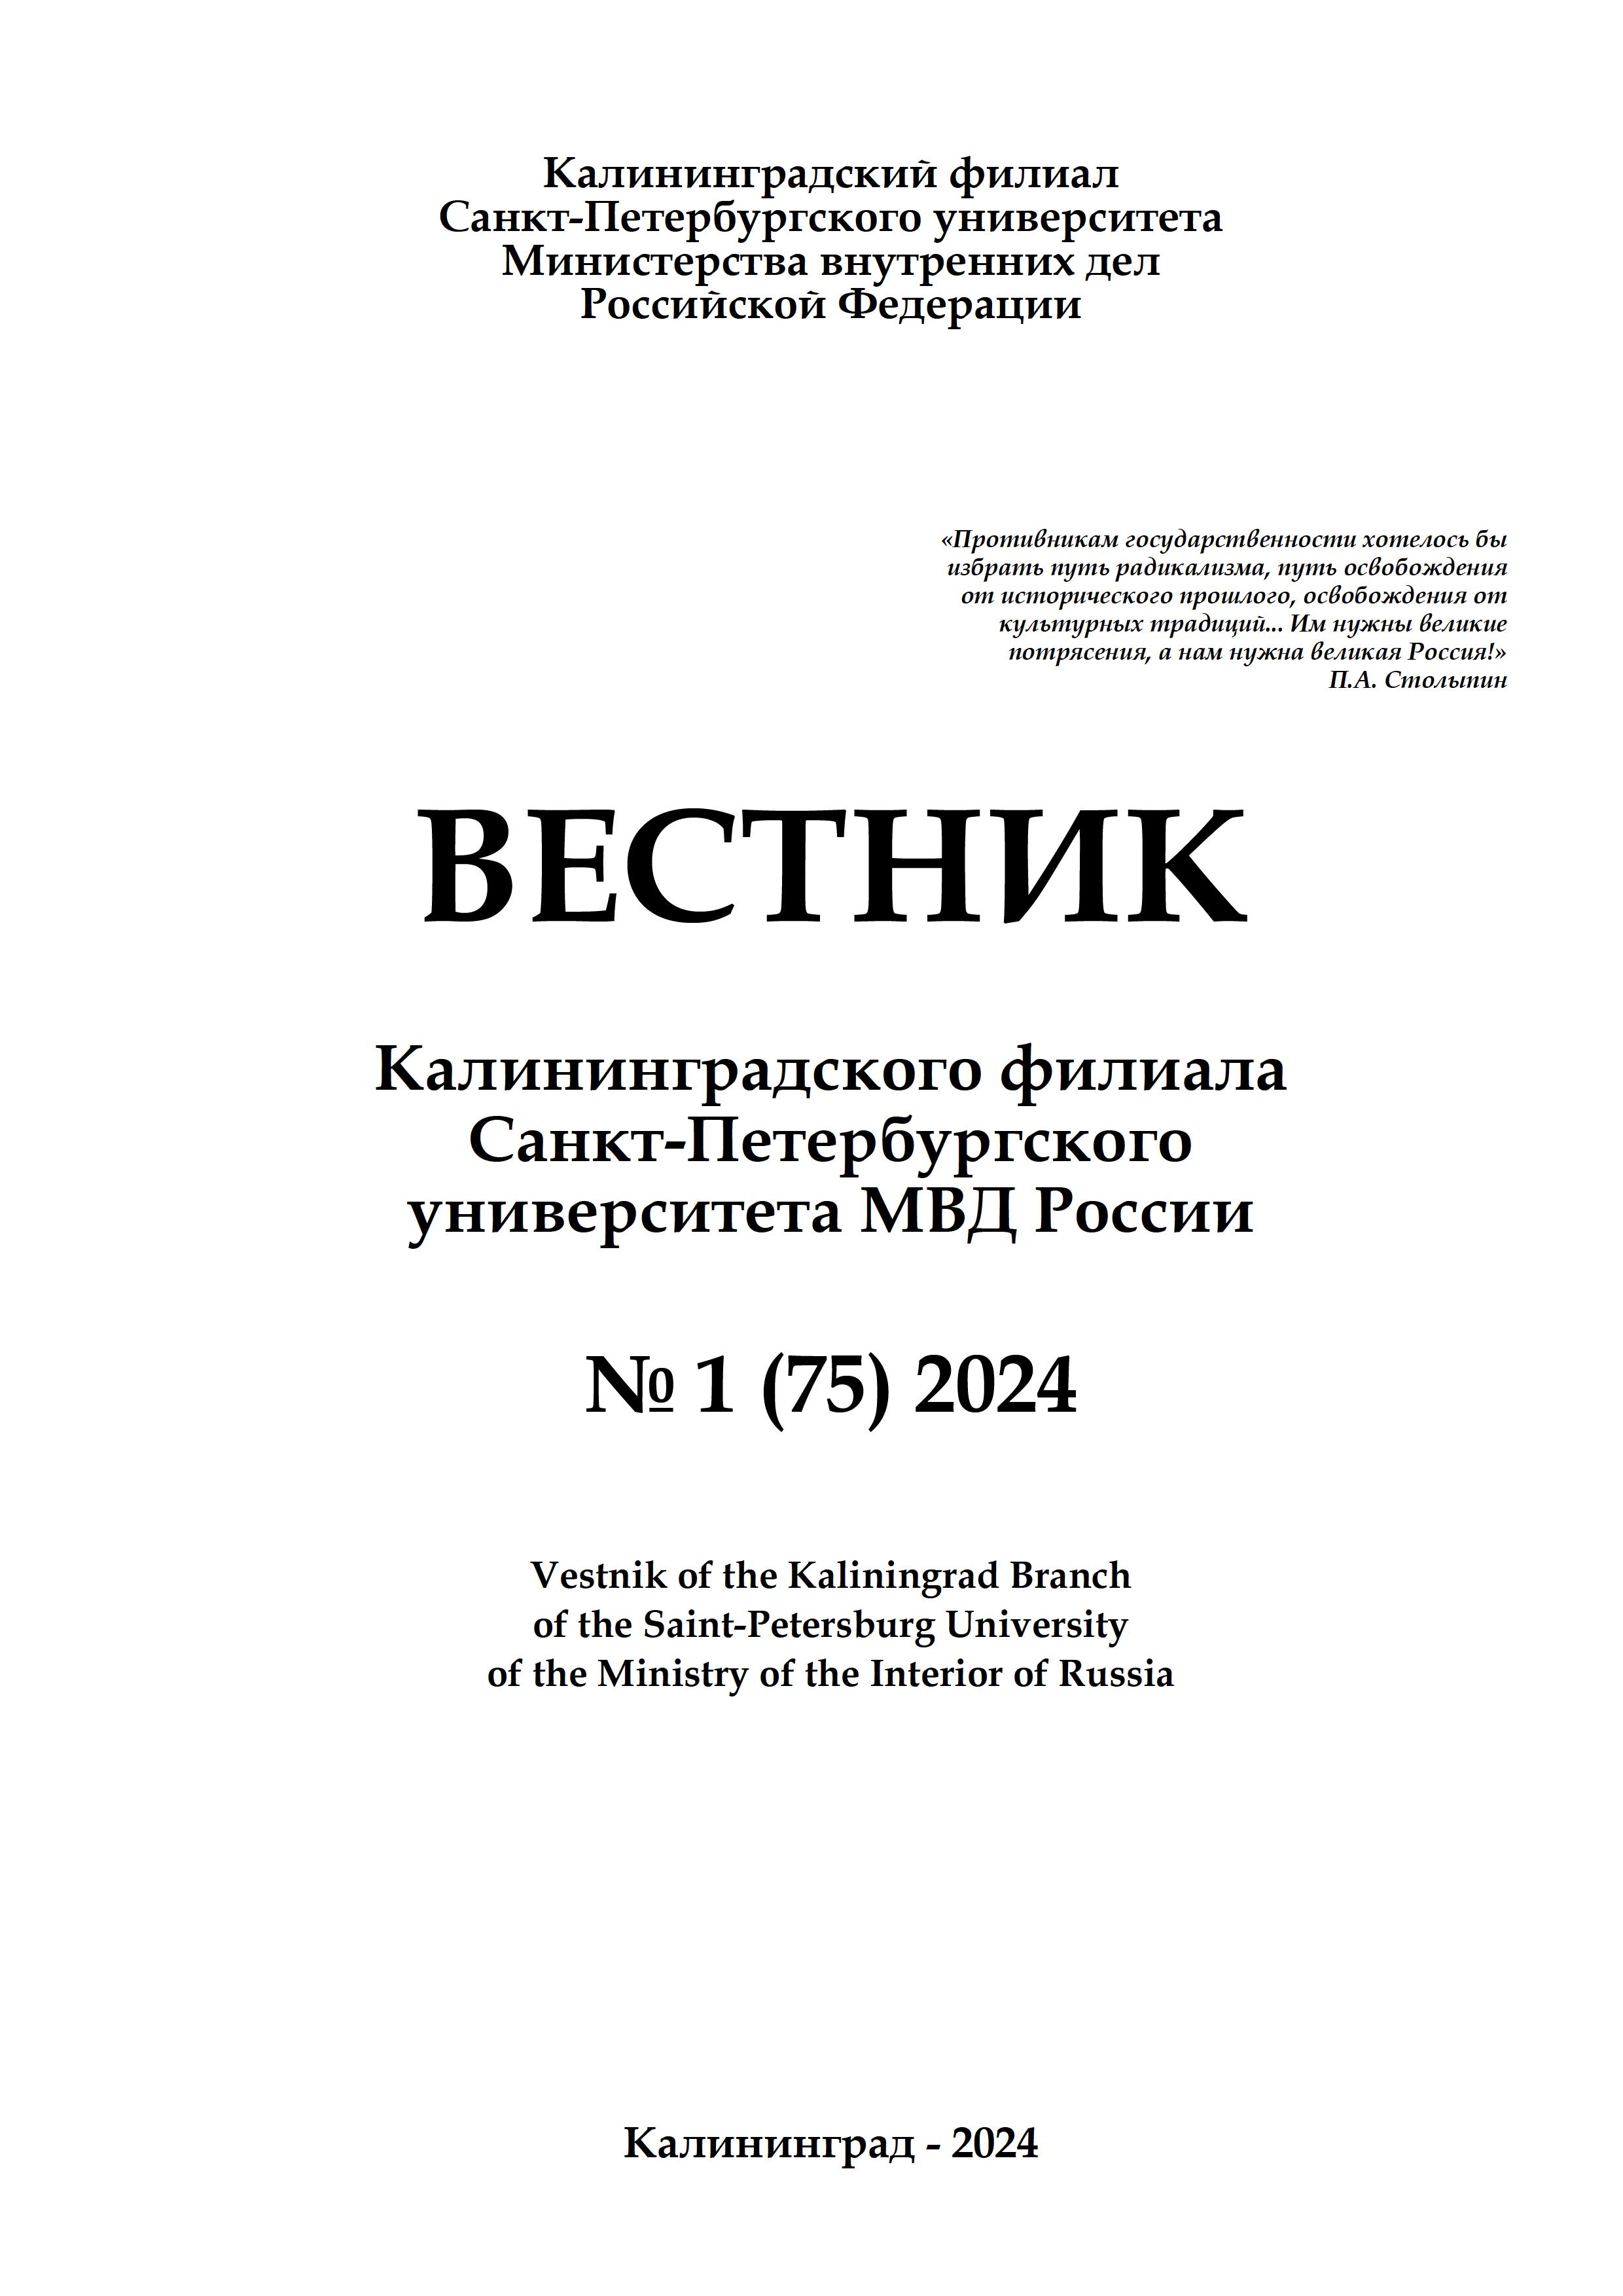                         Bulletin of the Kaliningrad branch of the Saint-Petersburg University of the Ministry of Internal Affairs of Russia
            